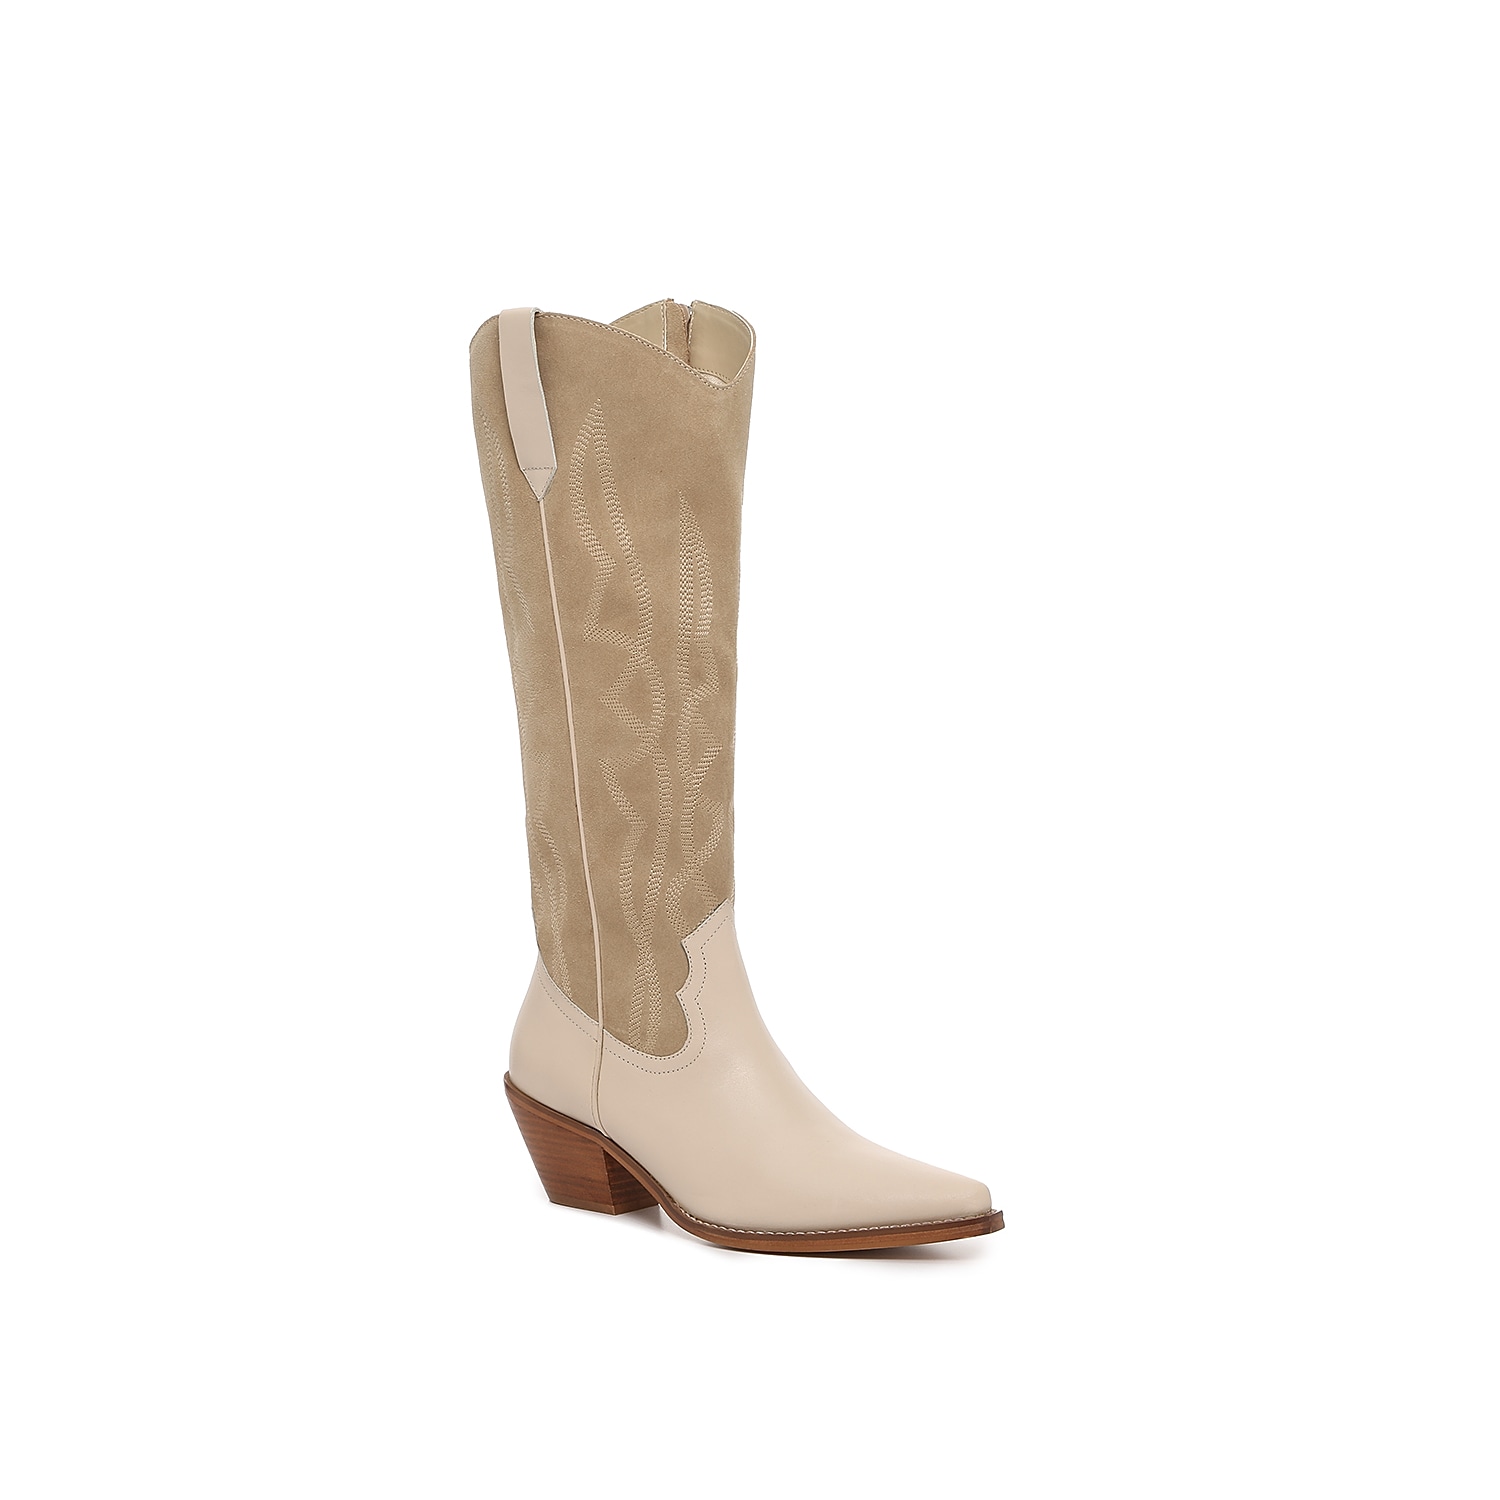 Coconuts Telluride Western Cowboy Boot | Women's | Taupe/Ivory | Size 6.5 | Boots | Block | Cowboy & Western